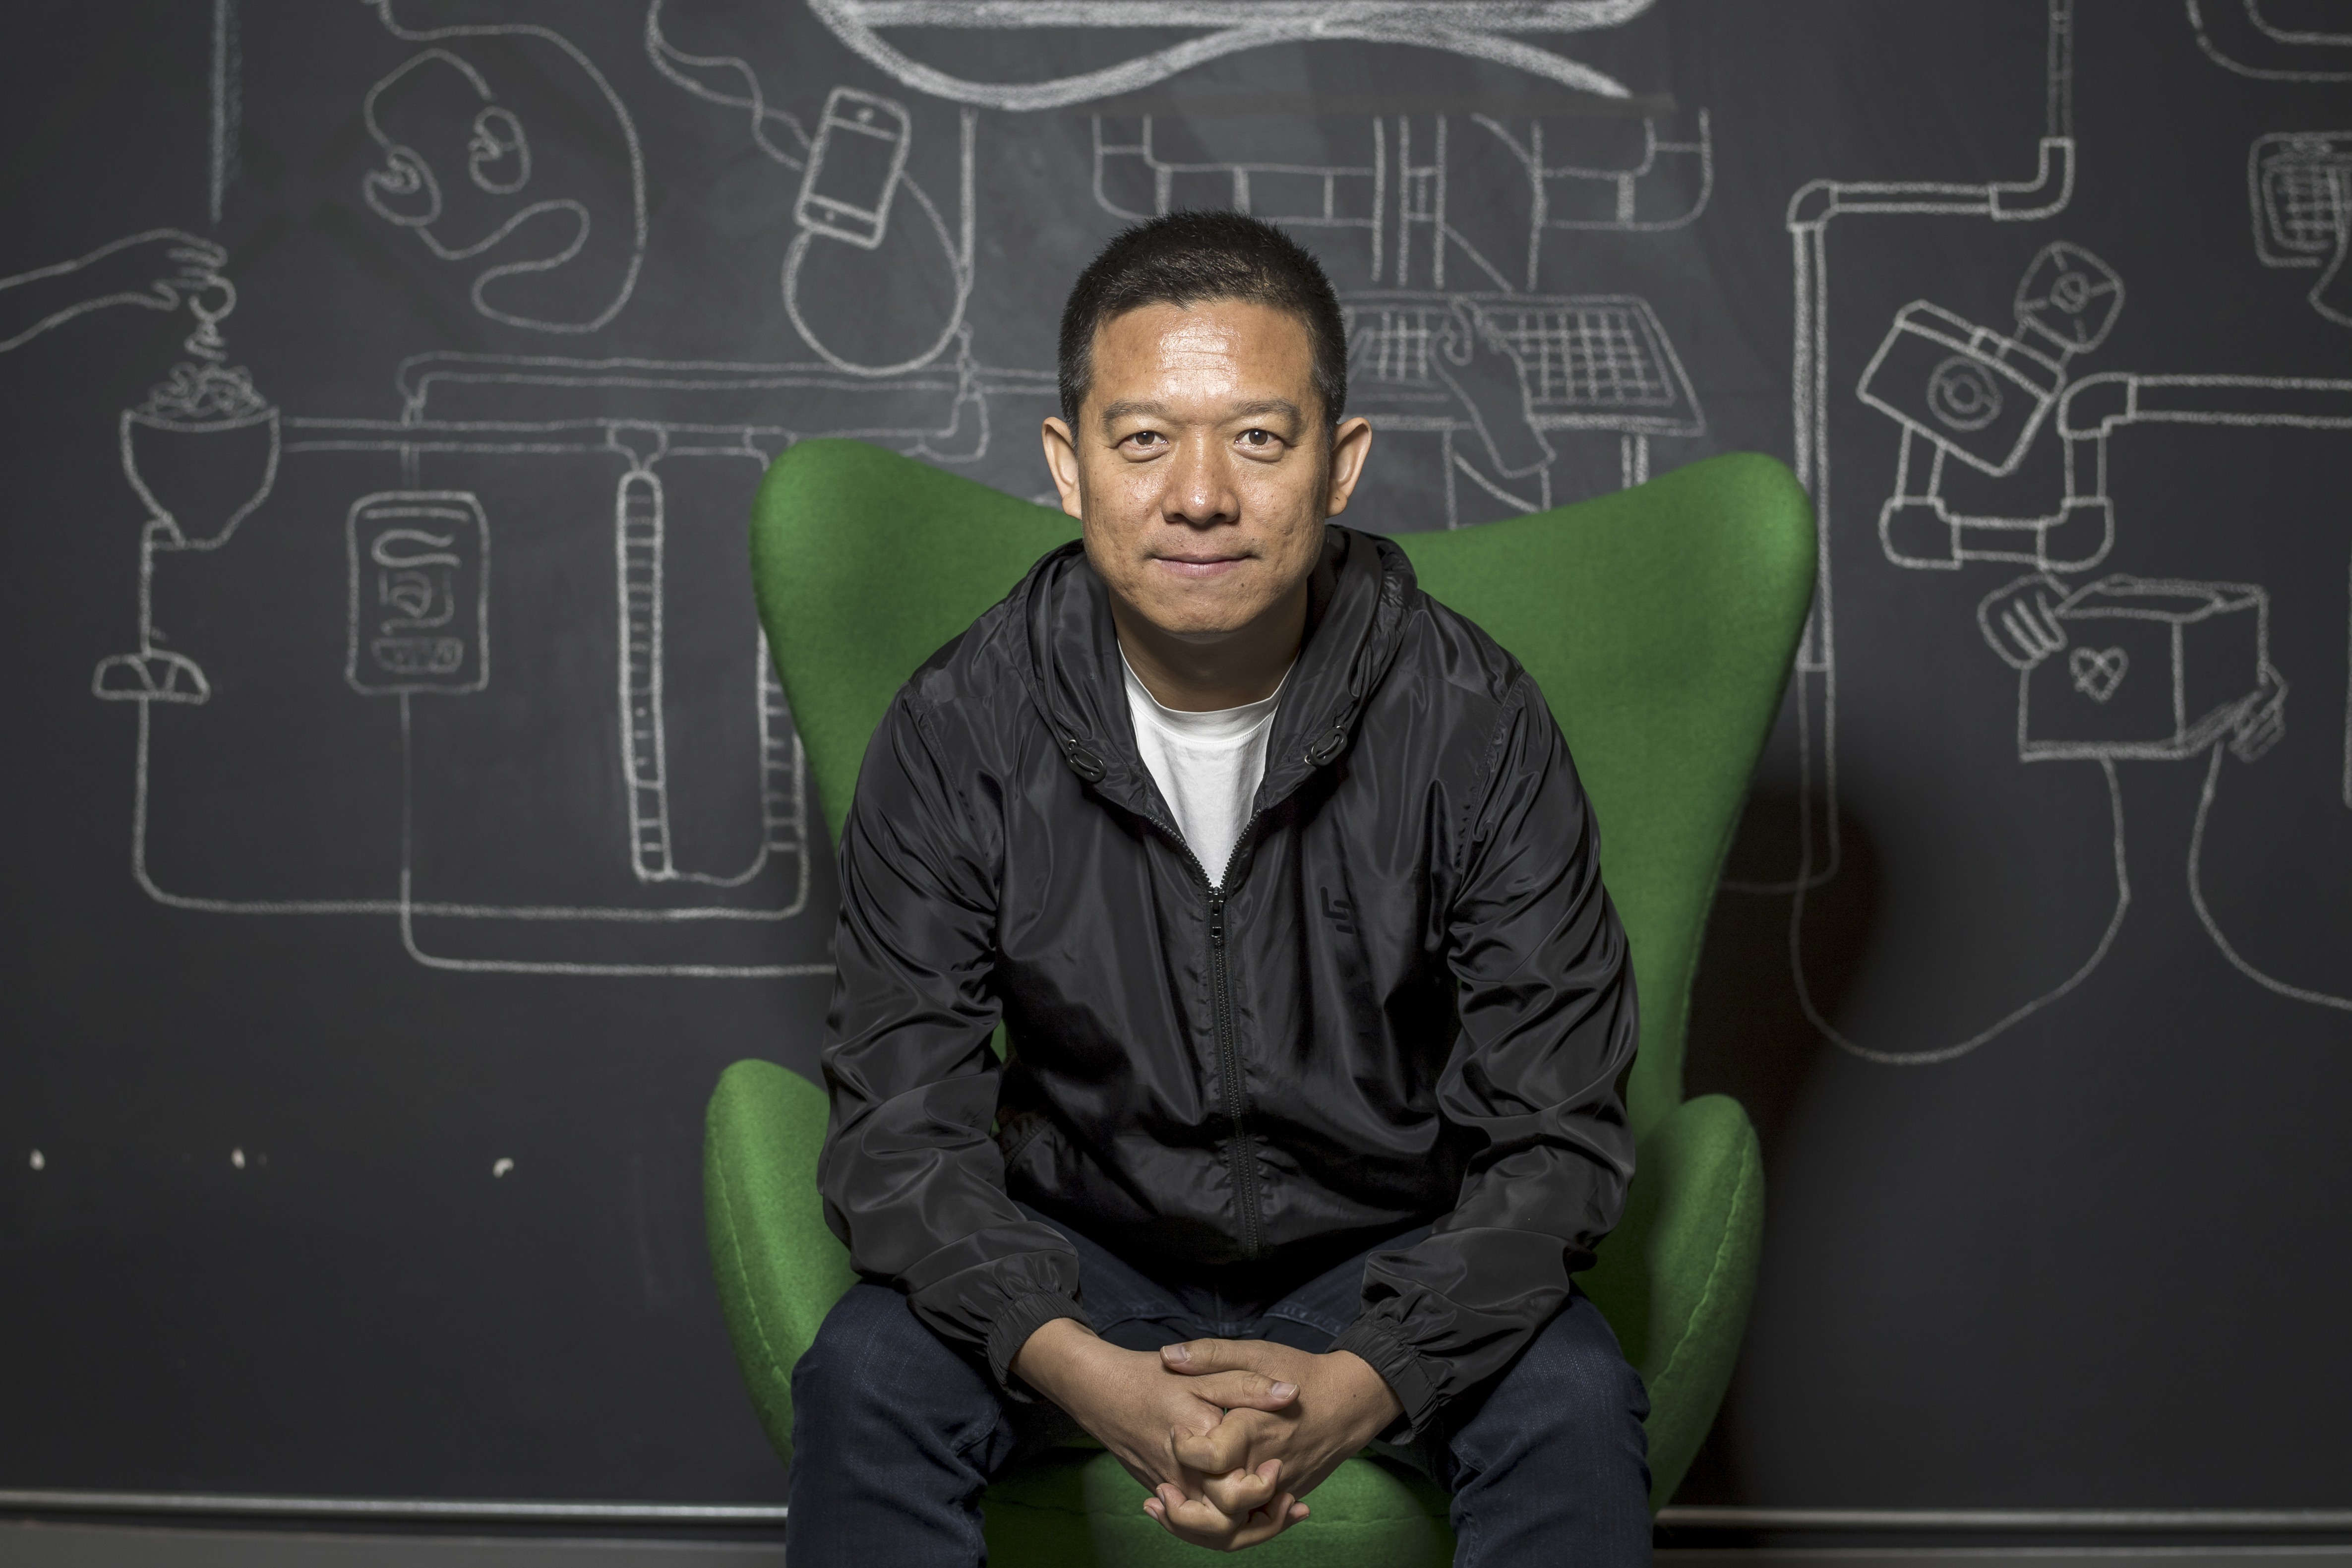 Chinese businessman Jia Yueting, founder of LeEco, has remained in the US since July last year, refusing to comply with requests by mainland regulators that he return to China. Photo: Bloomberg